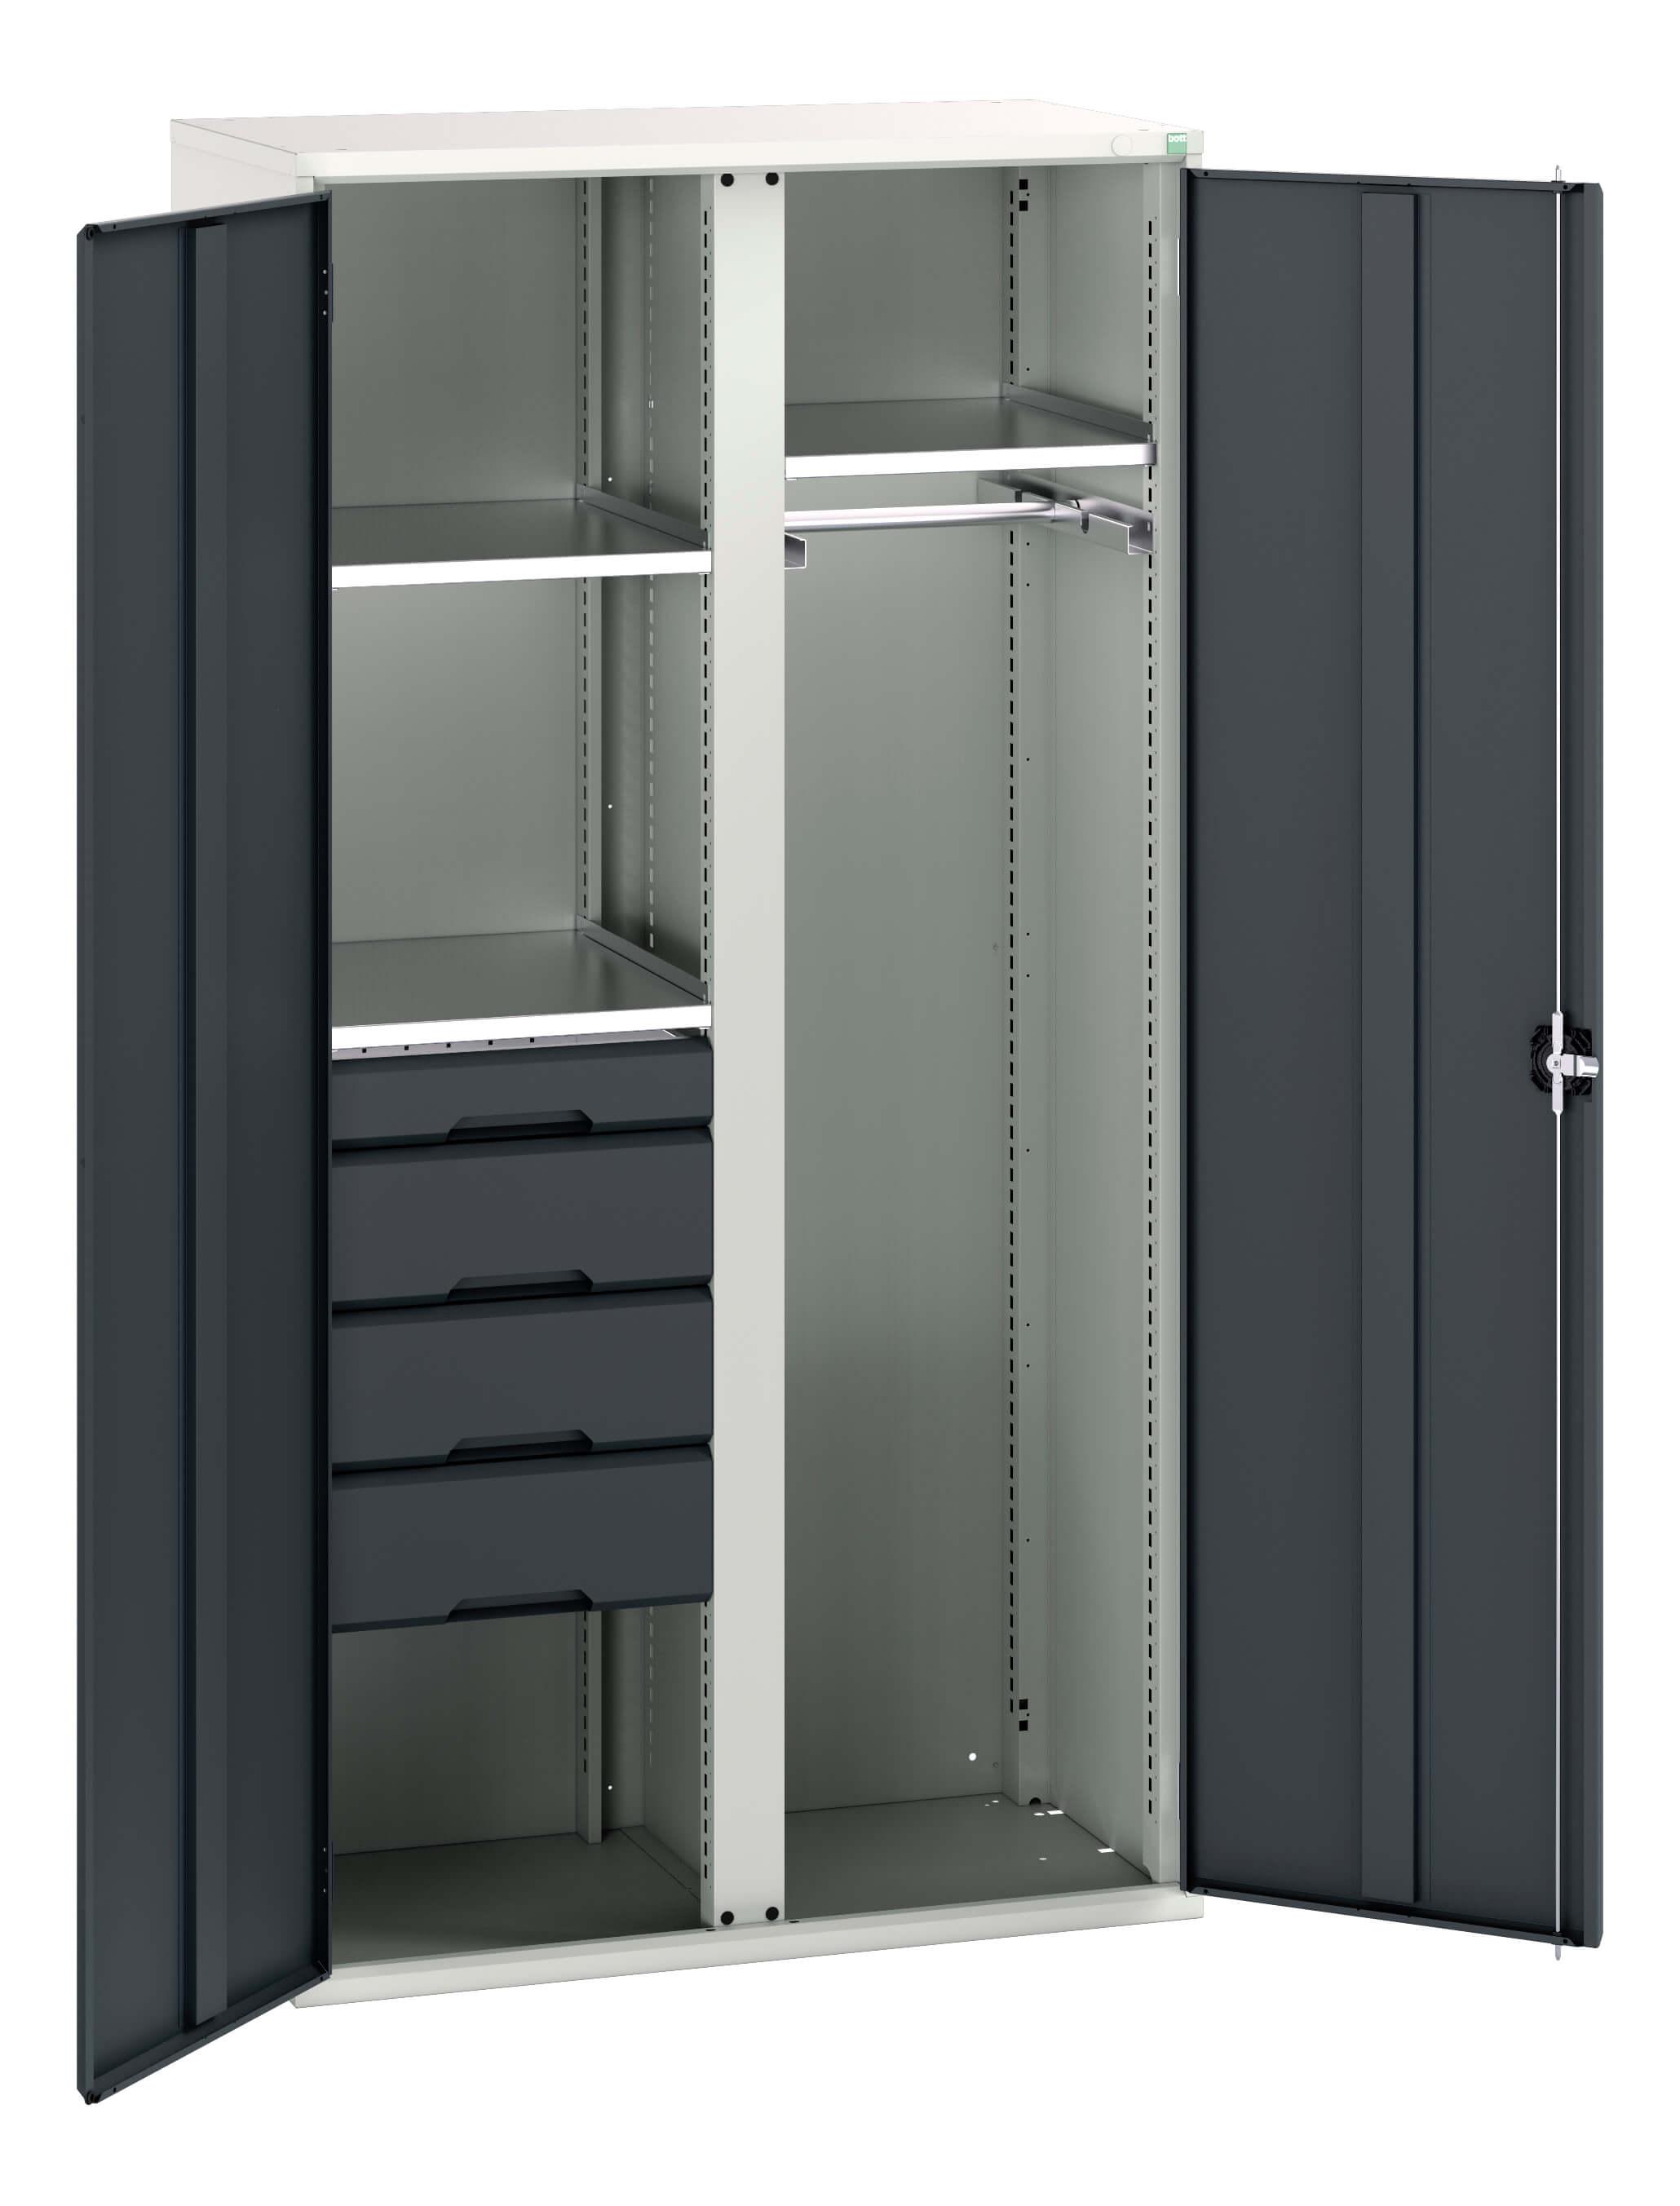 Bott Verso Ppe / Janitorial Kitted Cupboard With Vertical Partition - 16926581.19